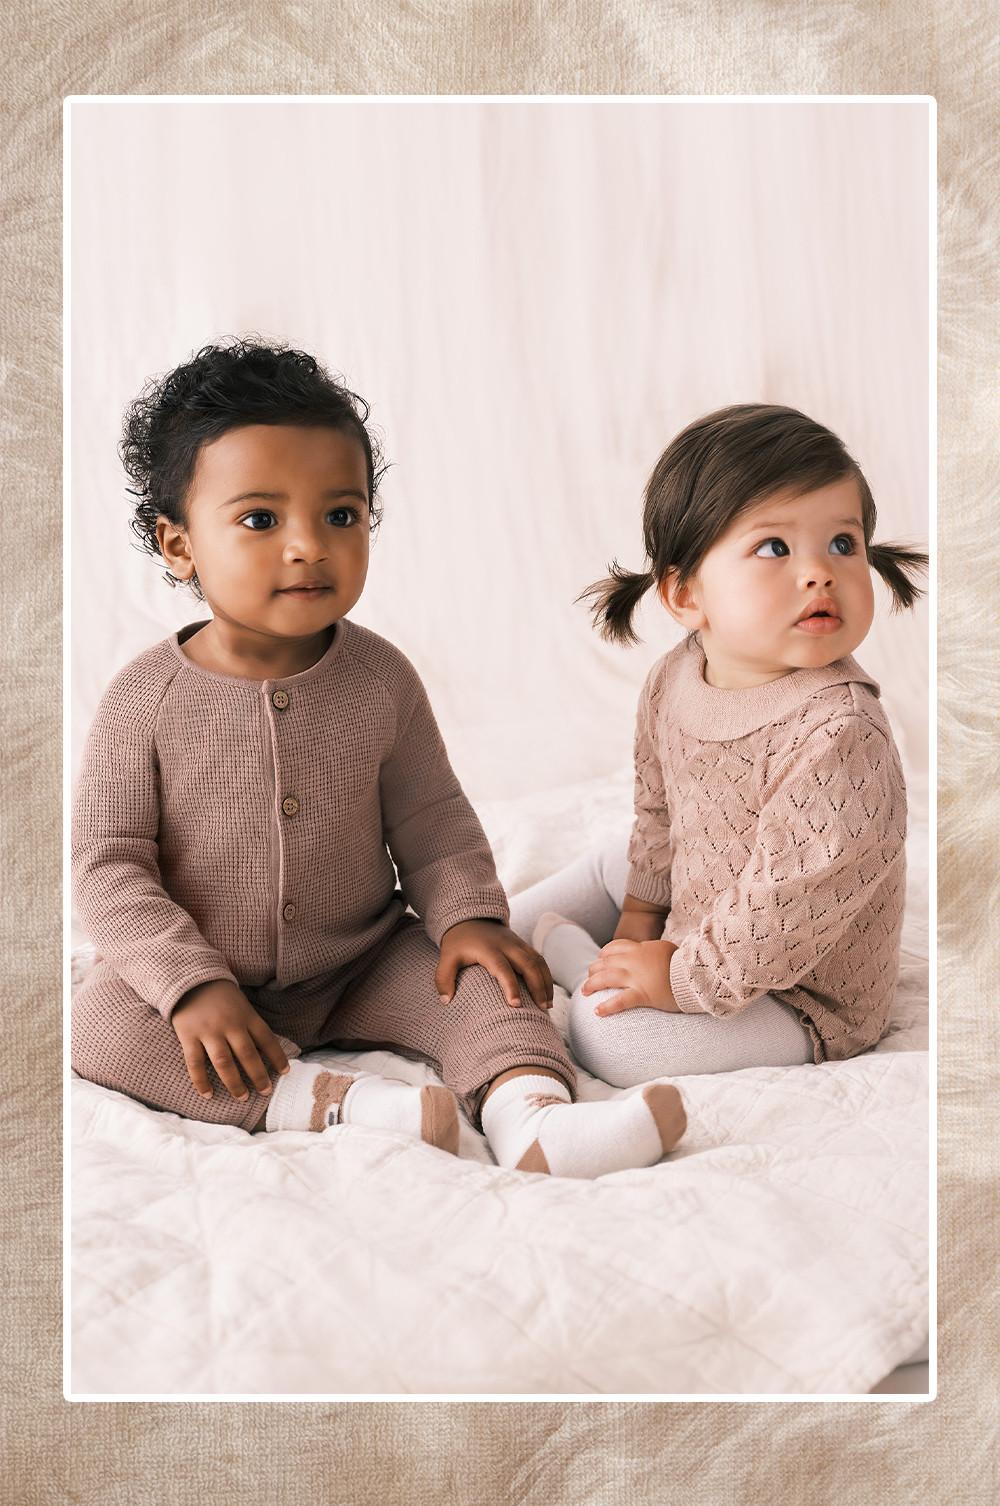 Babies wear knitted all in one